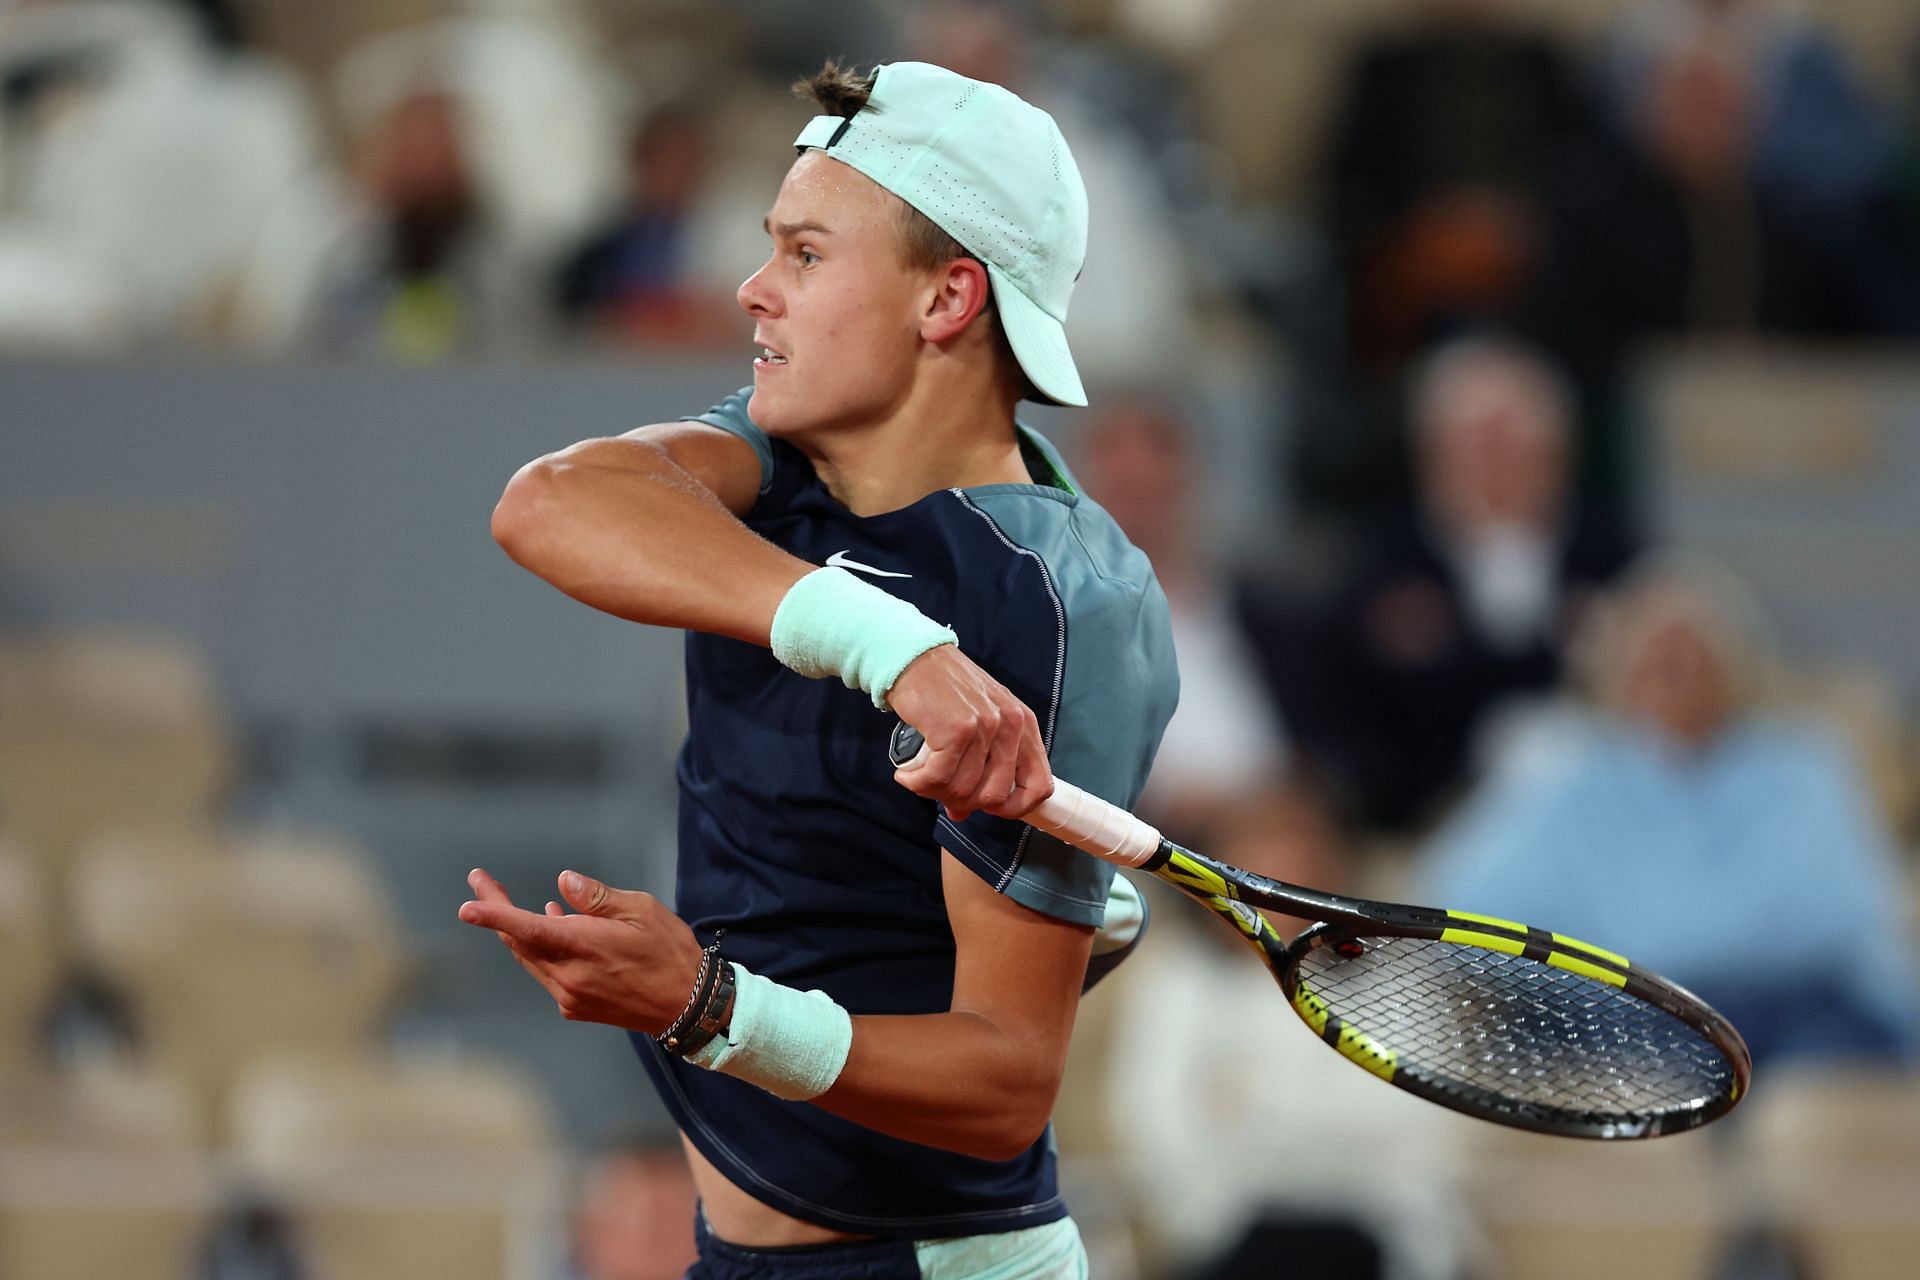 Holger Rune in action at the 2022 French Open